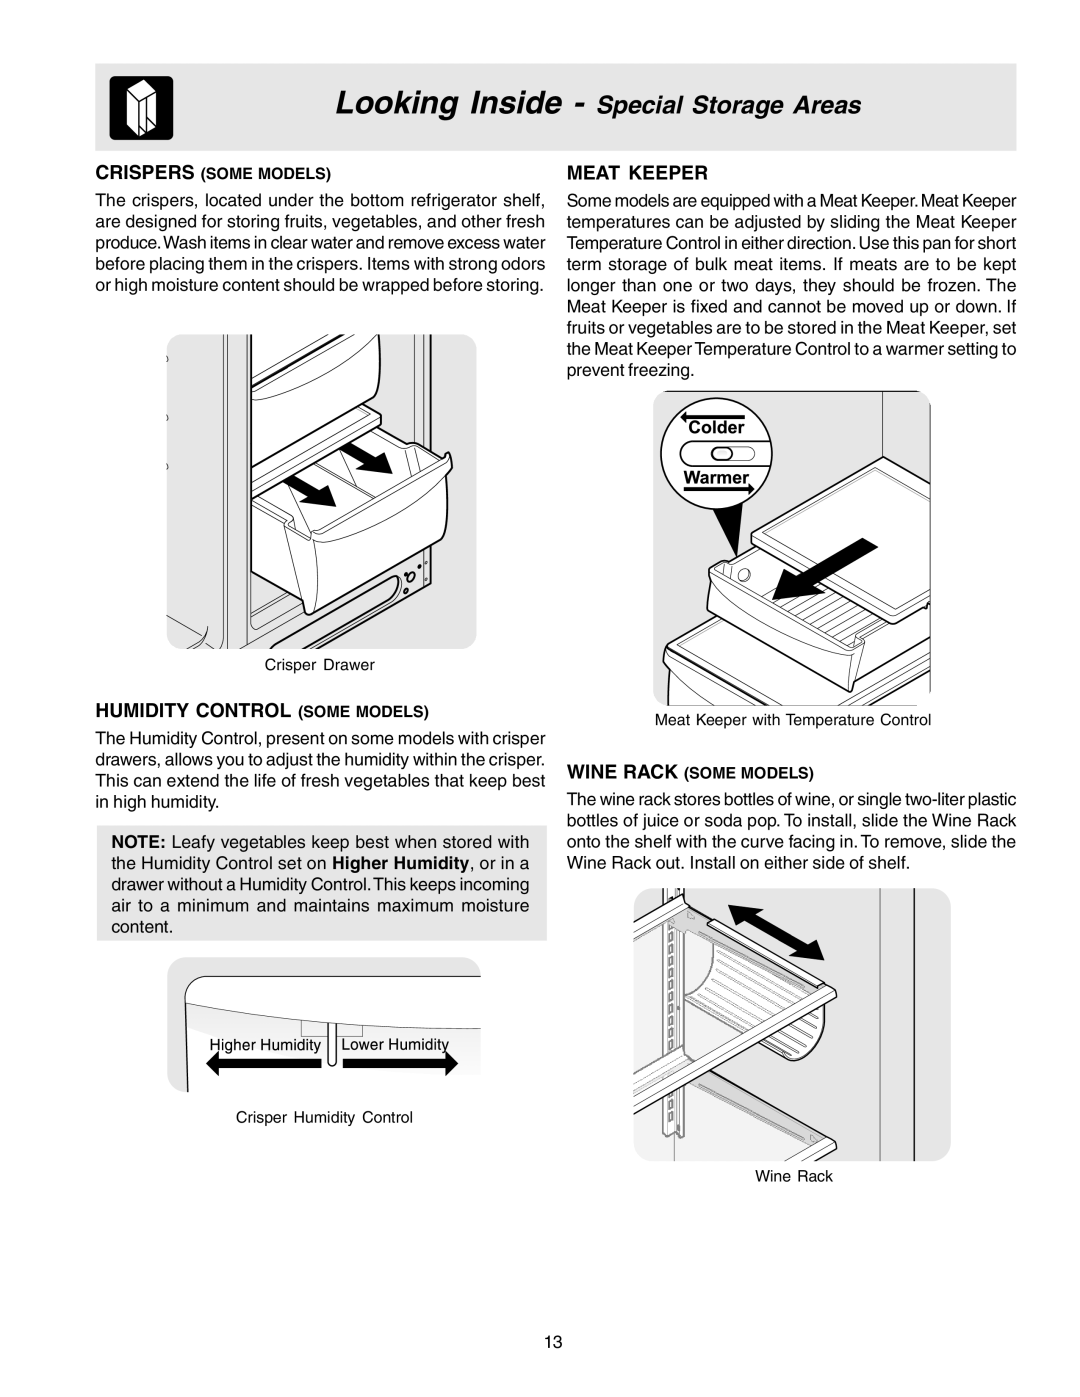 Electrolux U27107 manual Looking Inside - Special Storage Areas, Humidity Control Some Models, Meat Keeper 